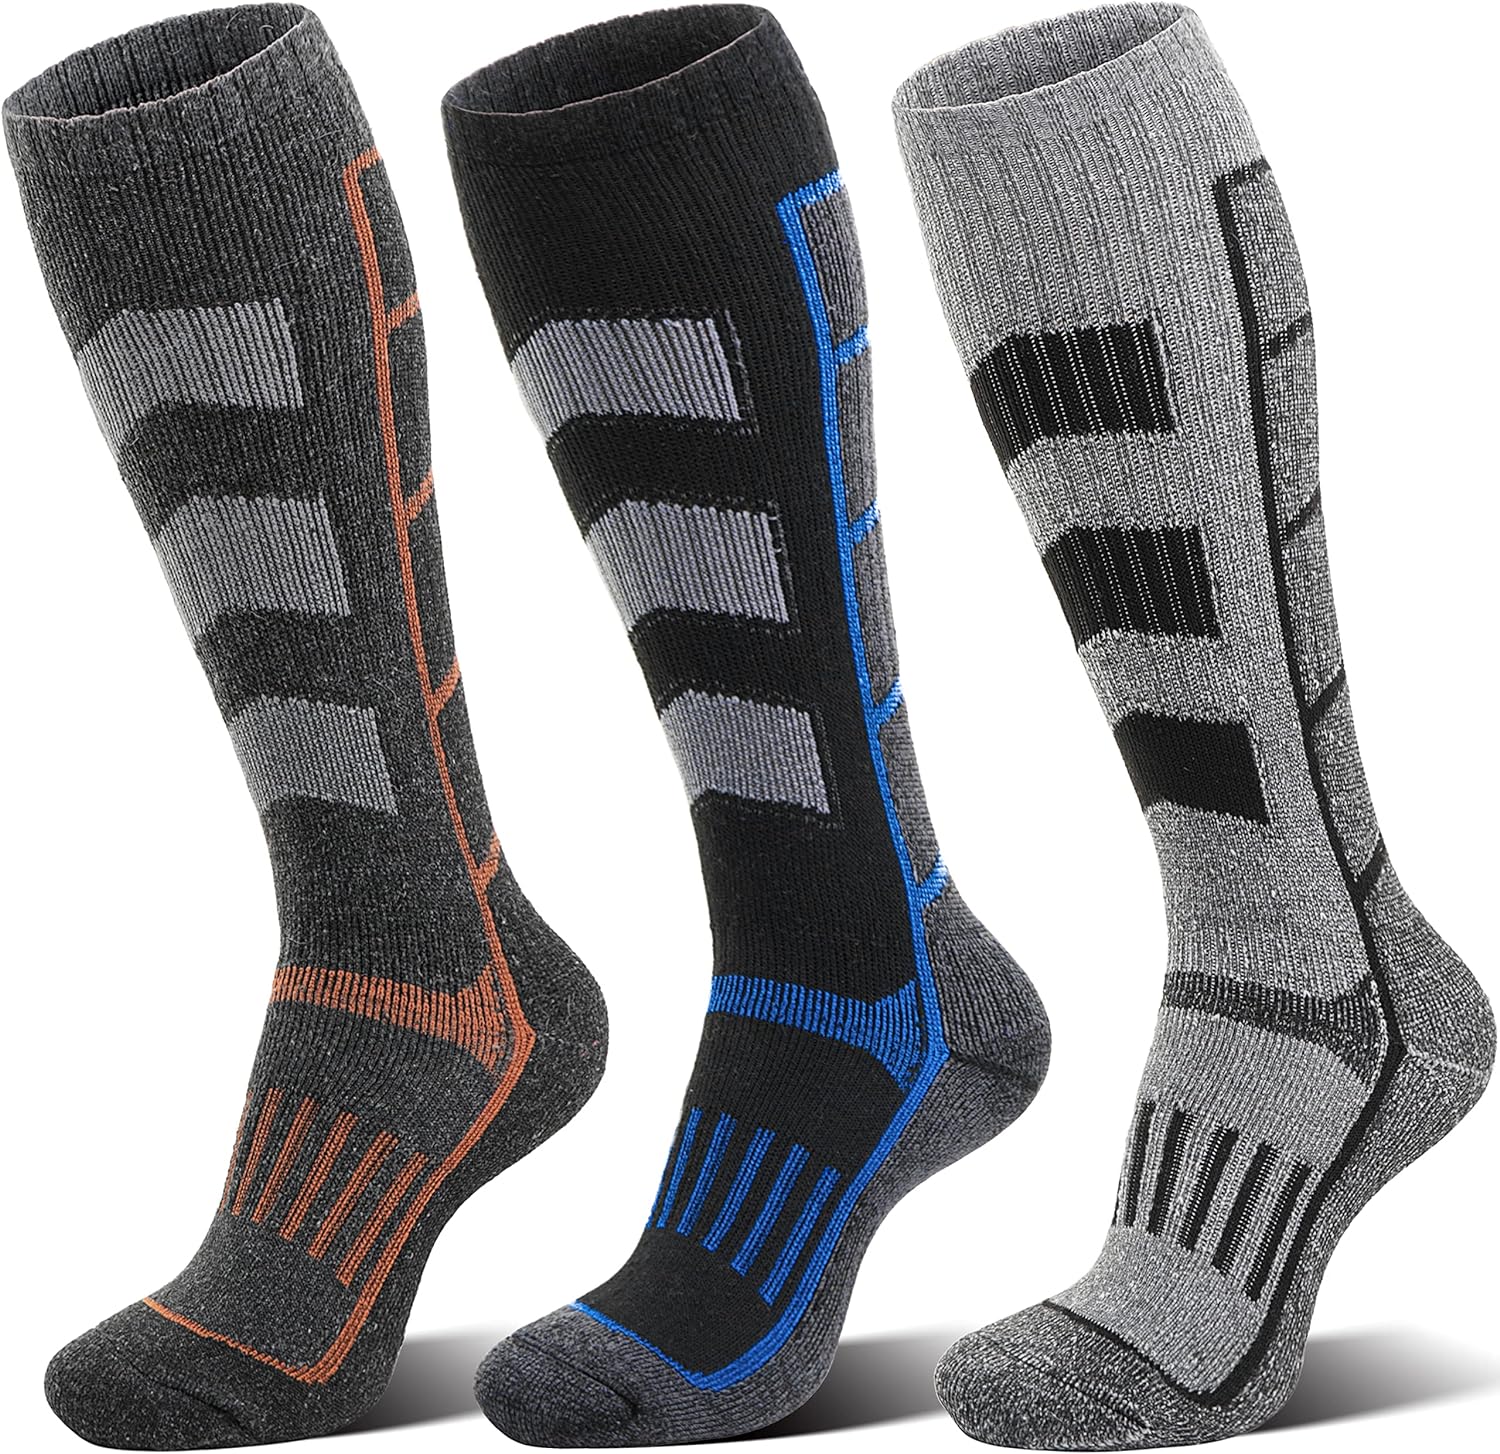 ANTSANG Mens Womens Merino Wool Ski Socks 3 Pairs Thermal Warm Thick Winter Knee High Snowboarding Skiing Outdoor Sports Socks for Cold Weather